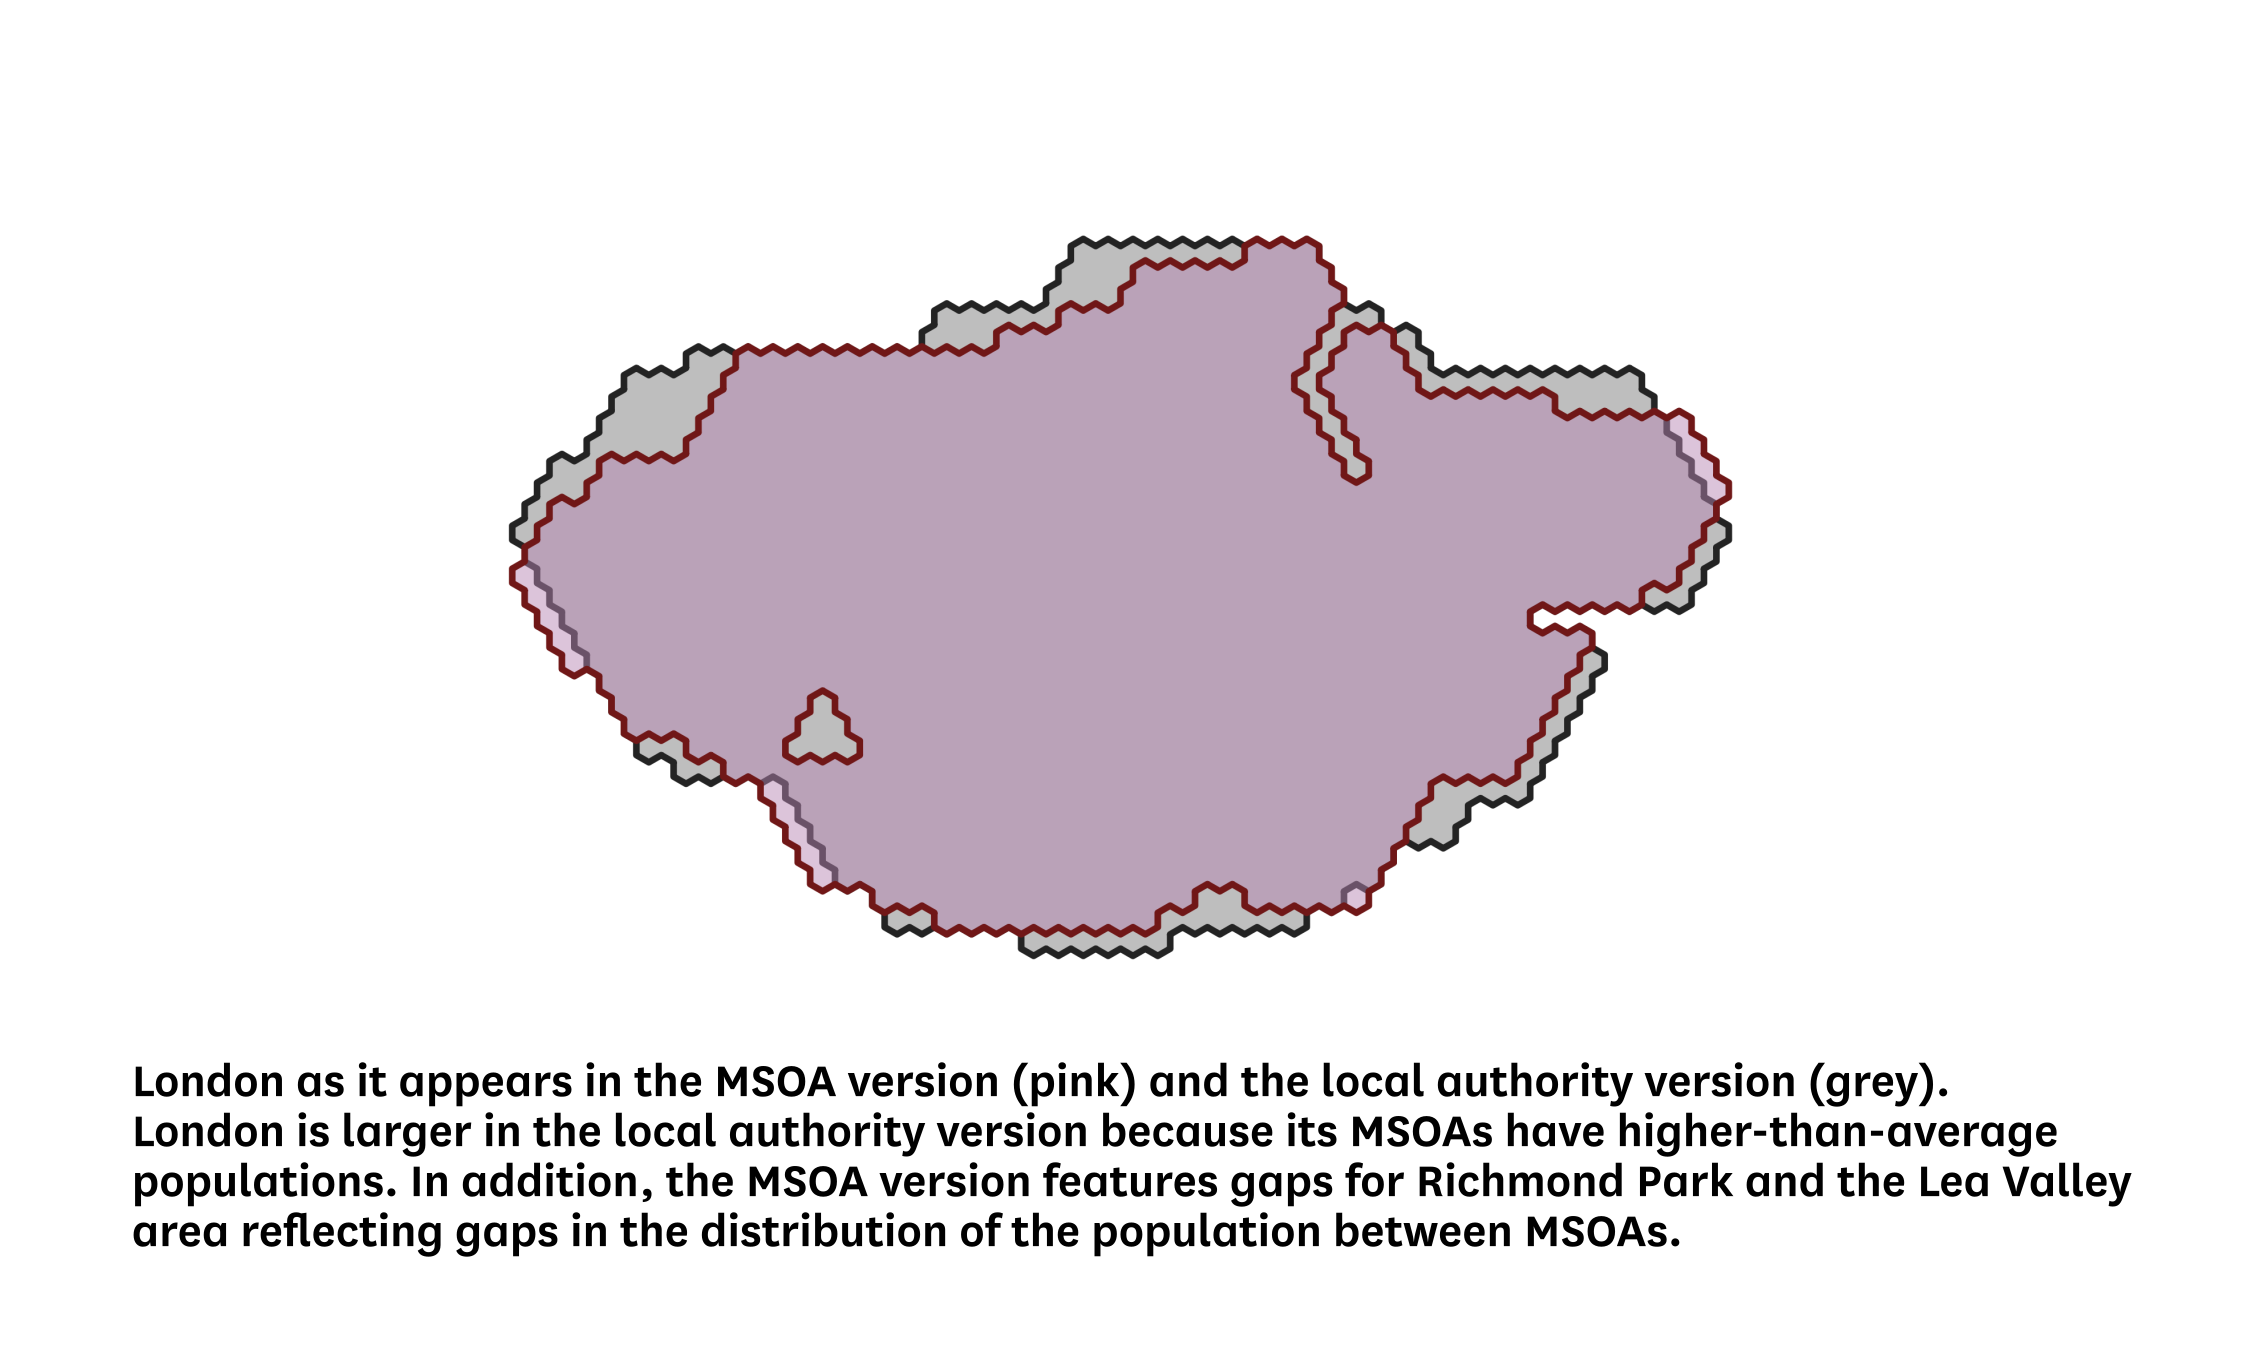 The different size of London on the local authority and MSOA hex cartograms